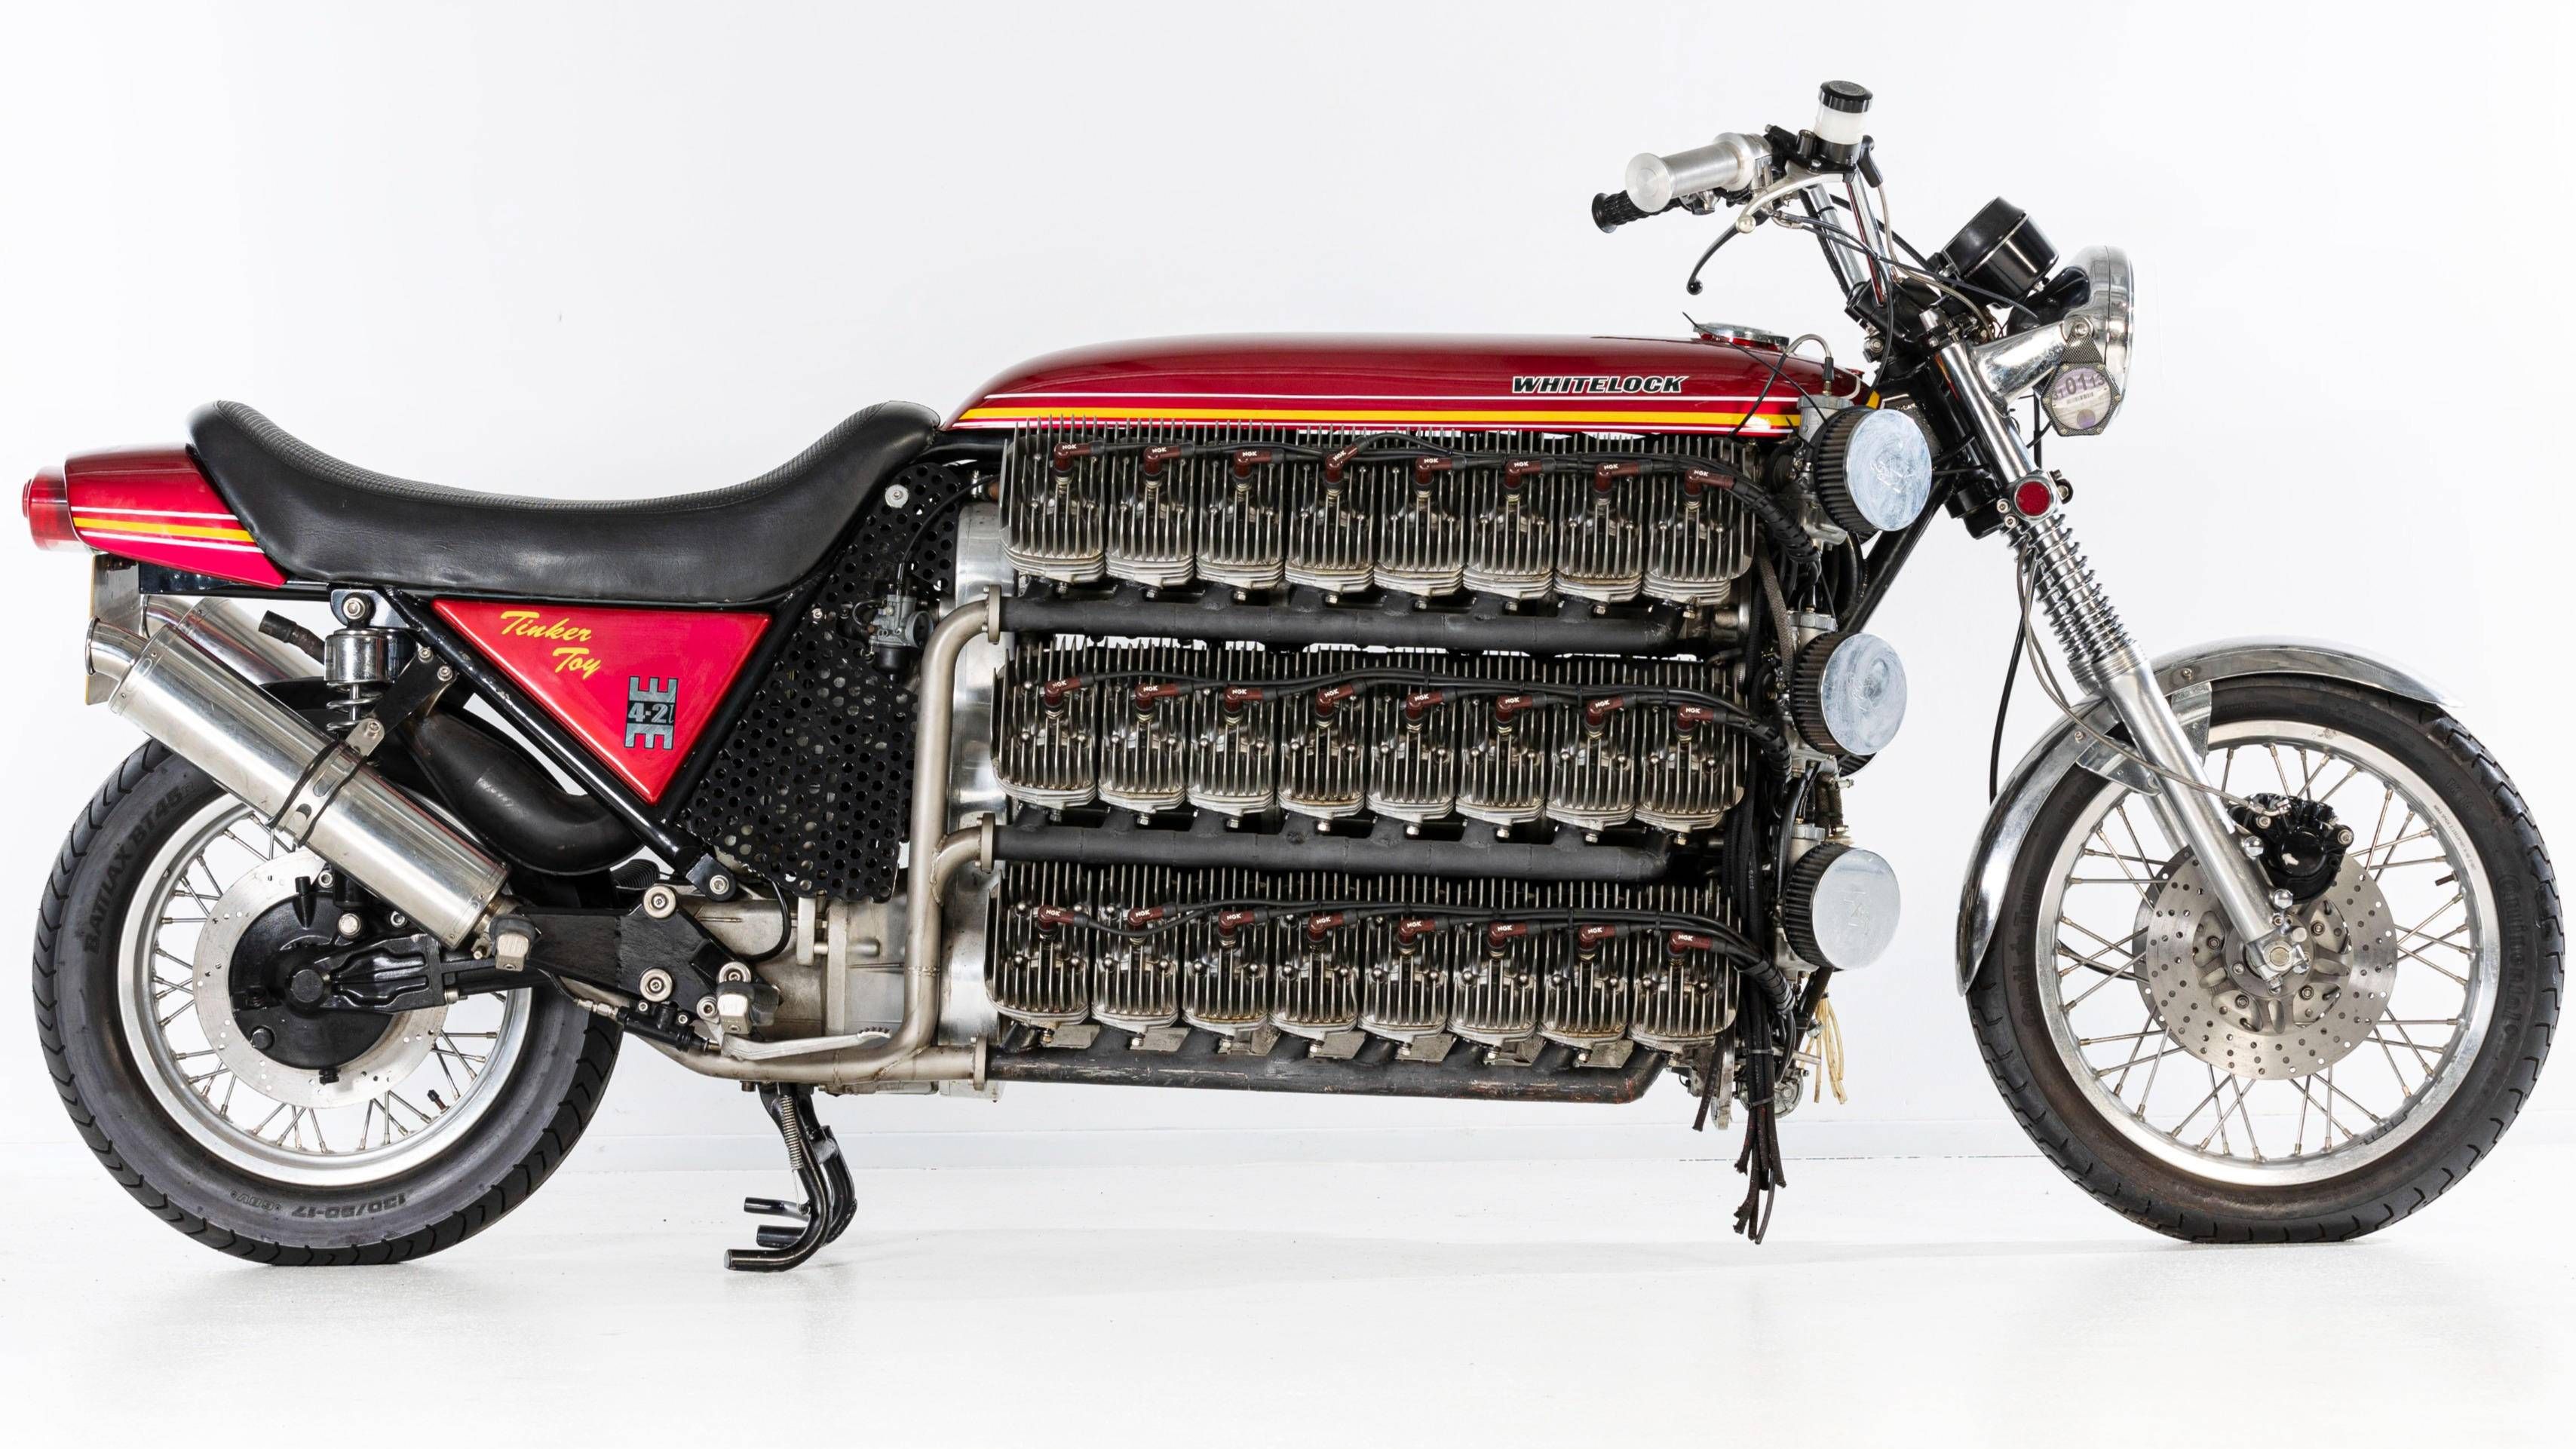 A Baffling 4200cc Motorcycle With 24x Cylinders Than A Harley Davidson